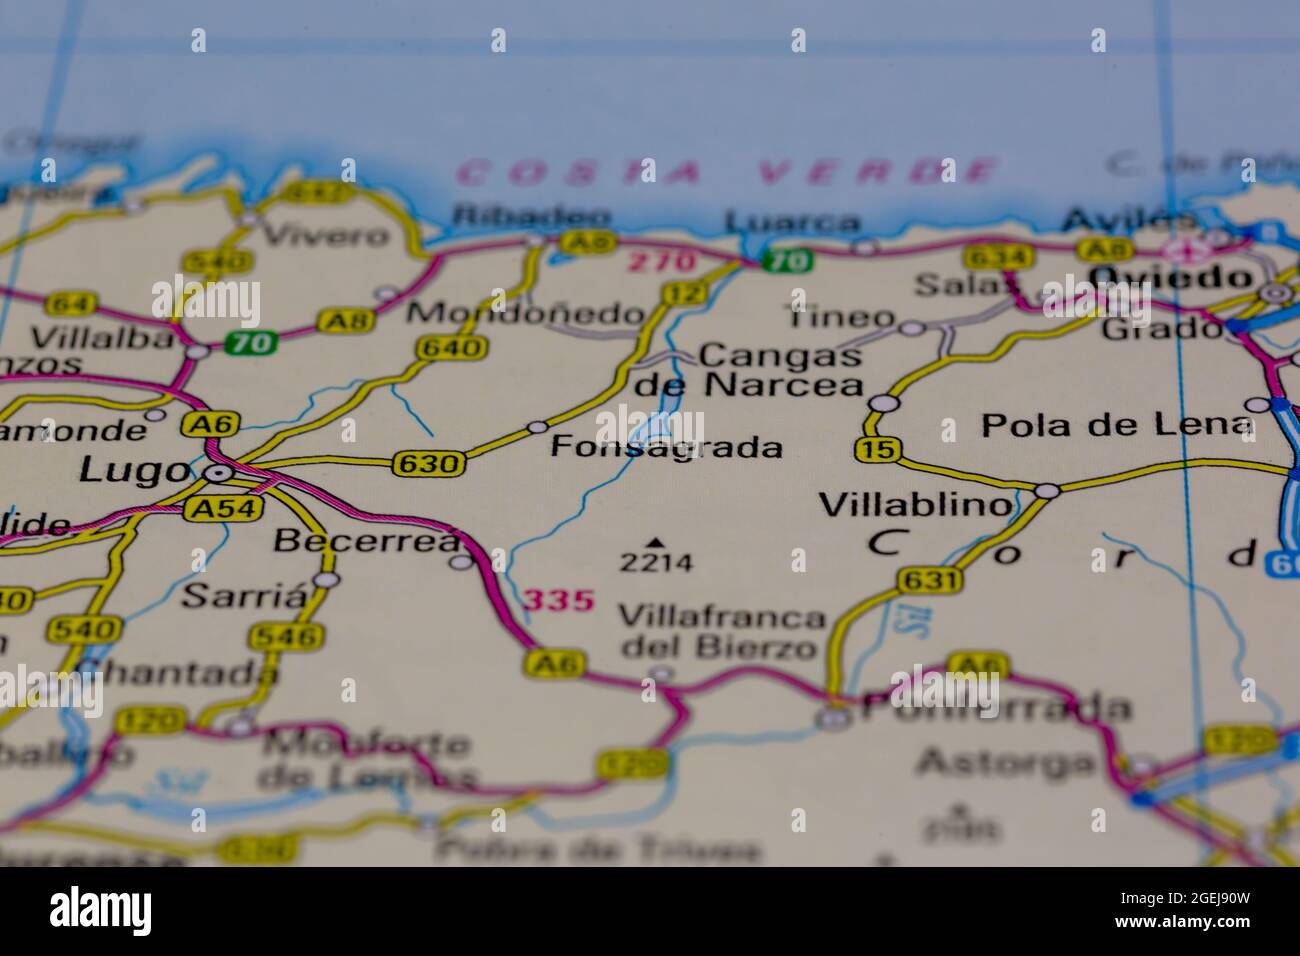 Fonsagrada Spain shown on a road map or Geography map Stock Photo